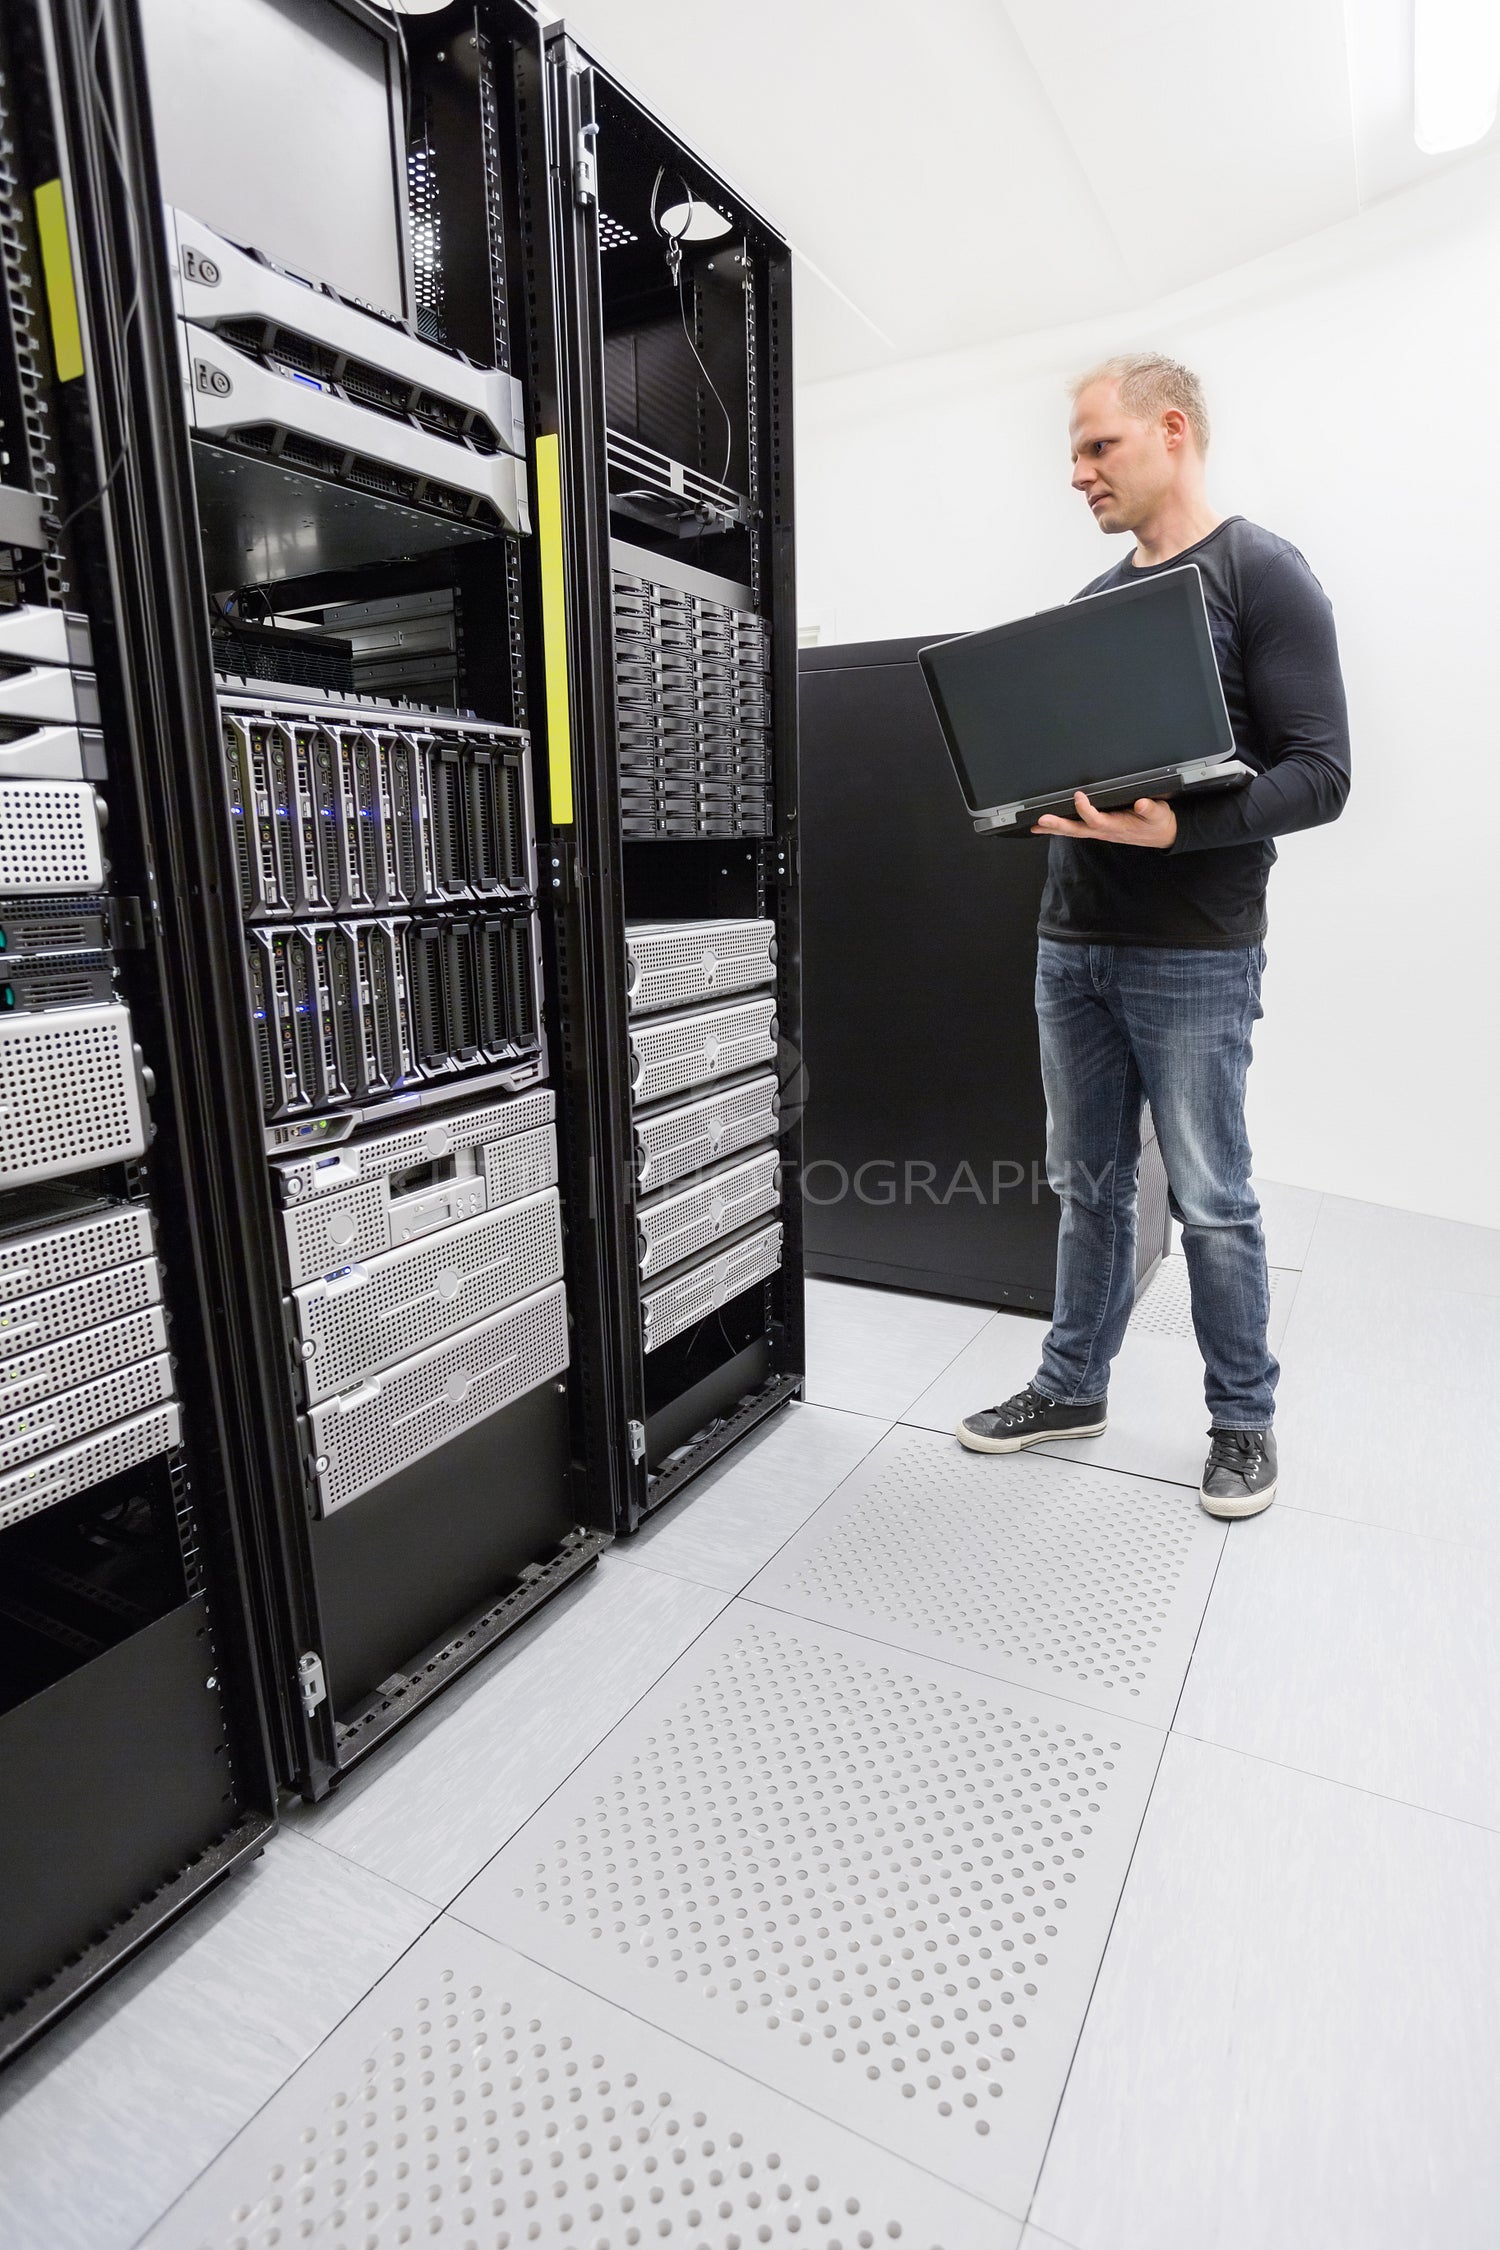 It engineer monitor systems in datacenter